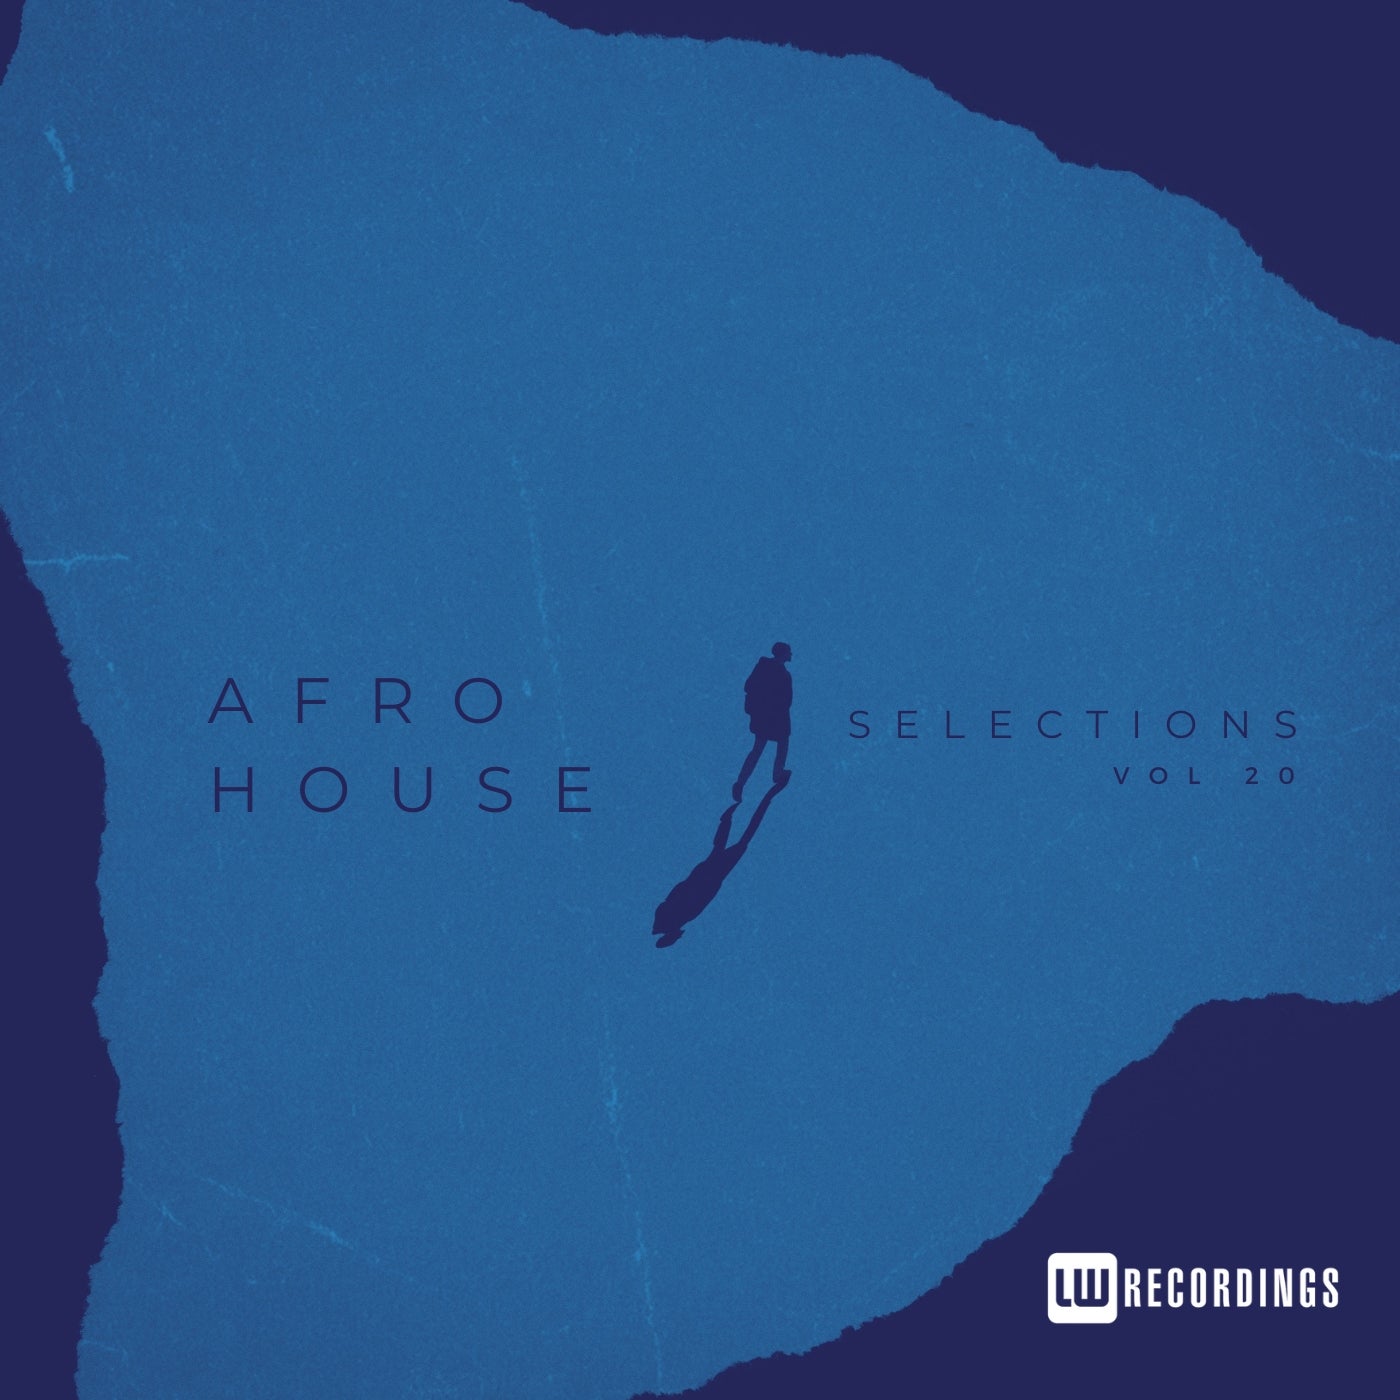 Afro House Selections, Vol. 20